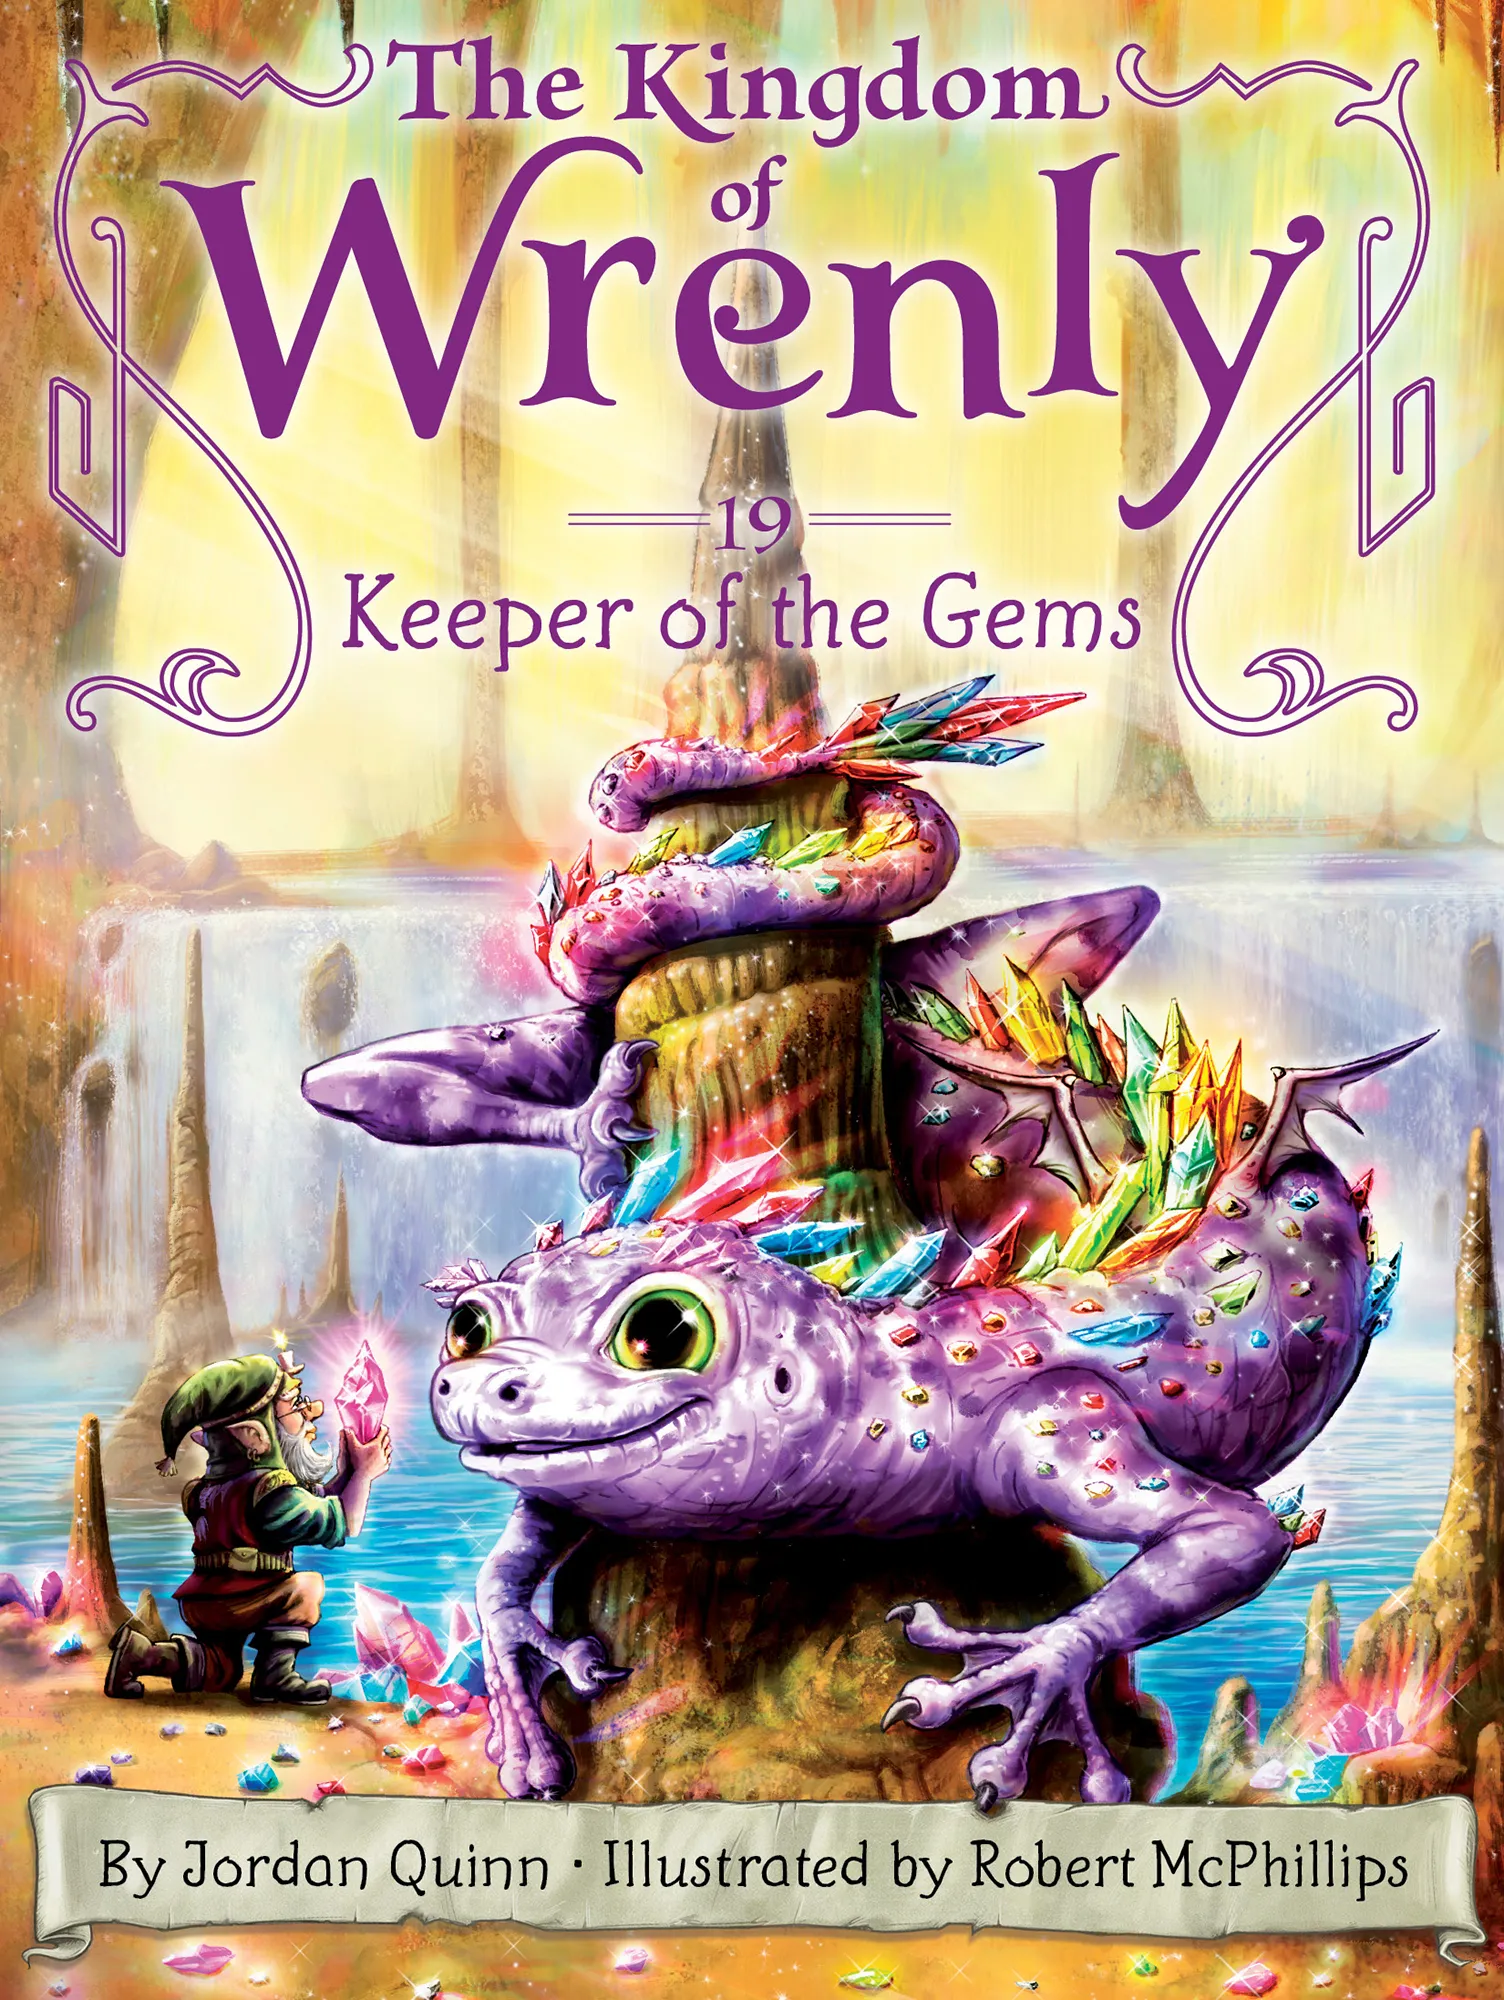 Keeper of the Gems (The Kingdom of Wrenly #19)